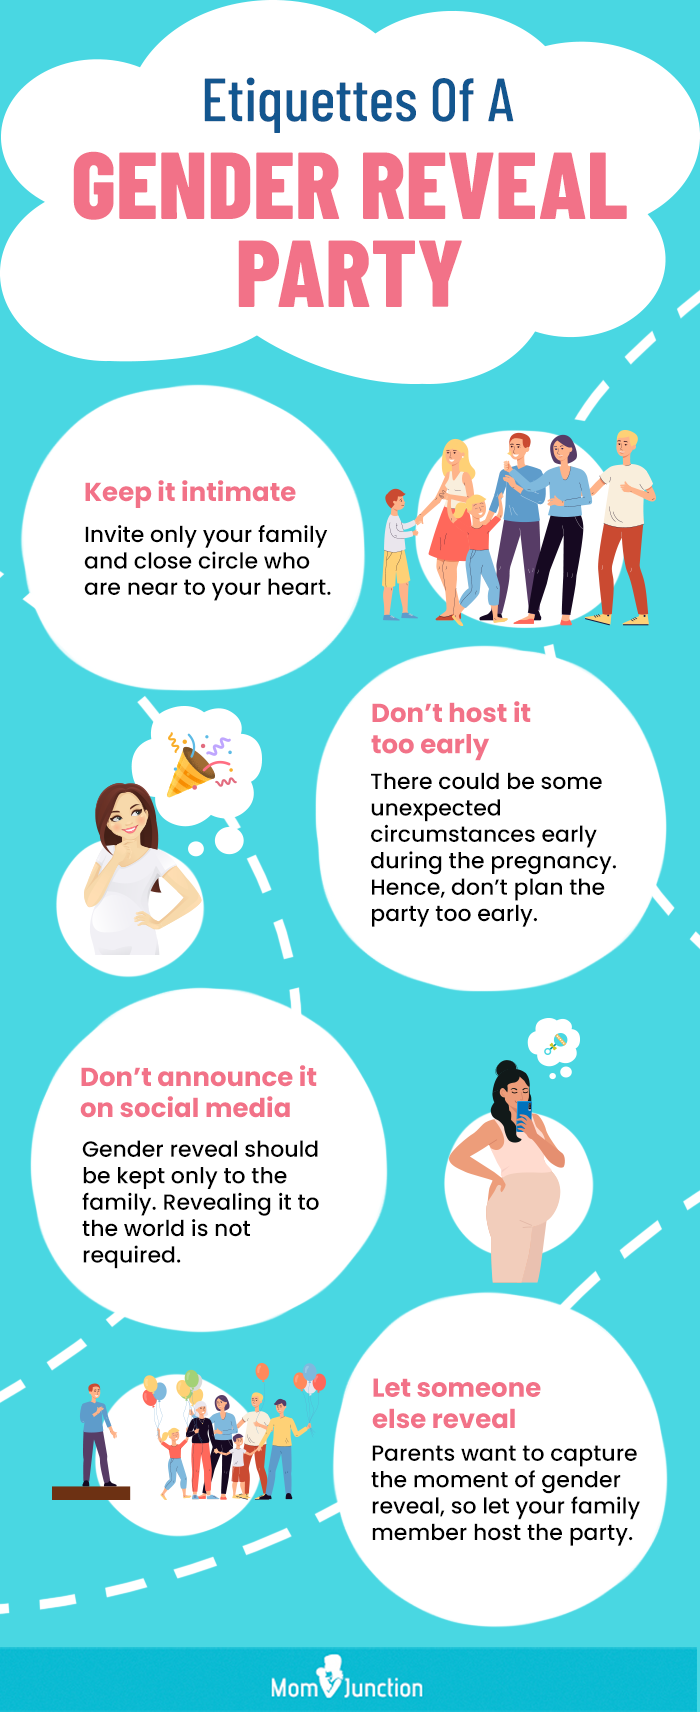 etiquettes of a gender reveal party (infographic)